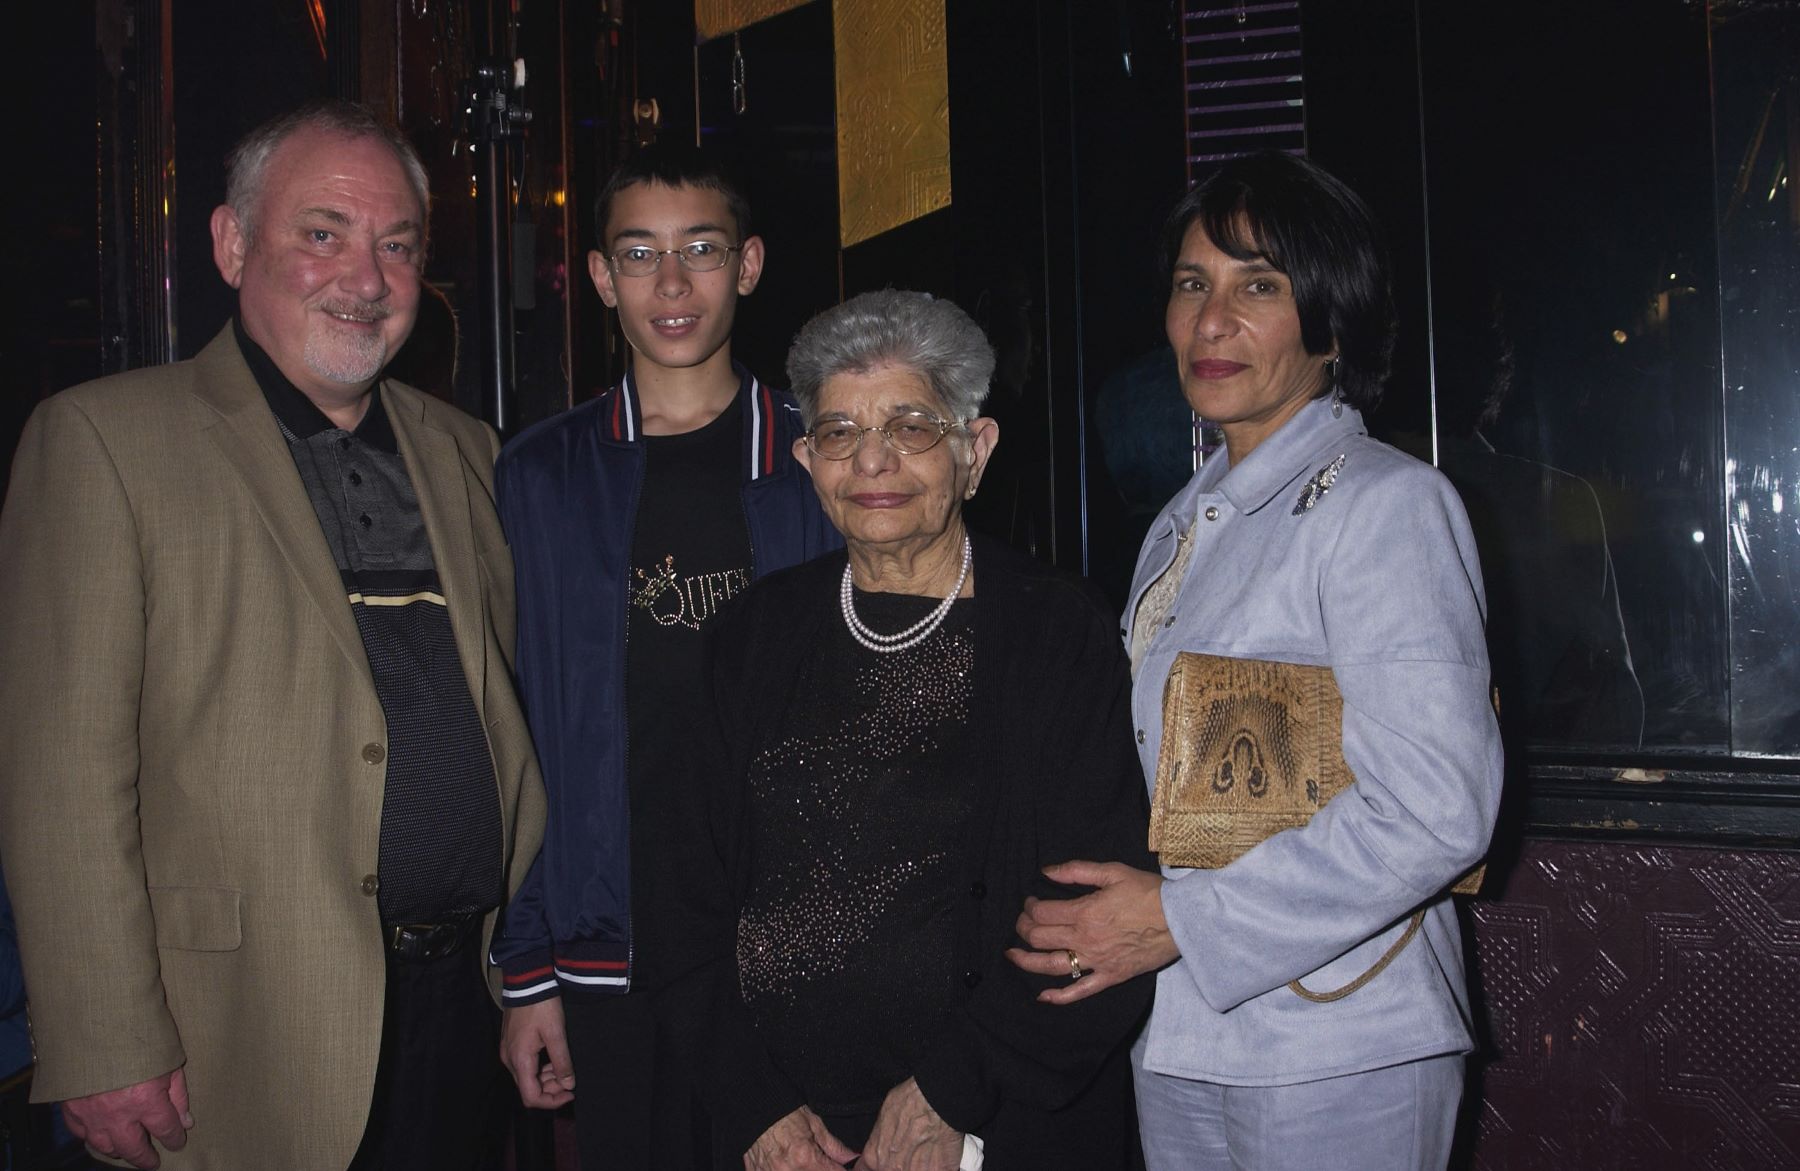 (L to R) Freddie Mercury's partner, nephew, mother, and sister at the afterparty of the 'We Will Rock You' musical